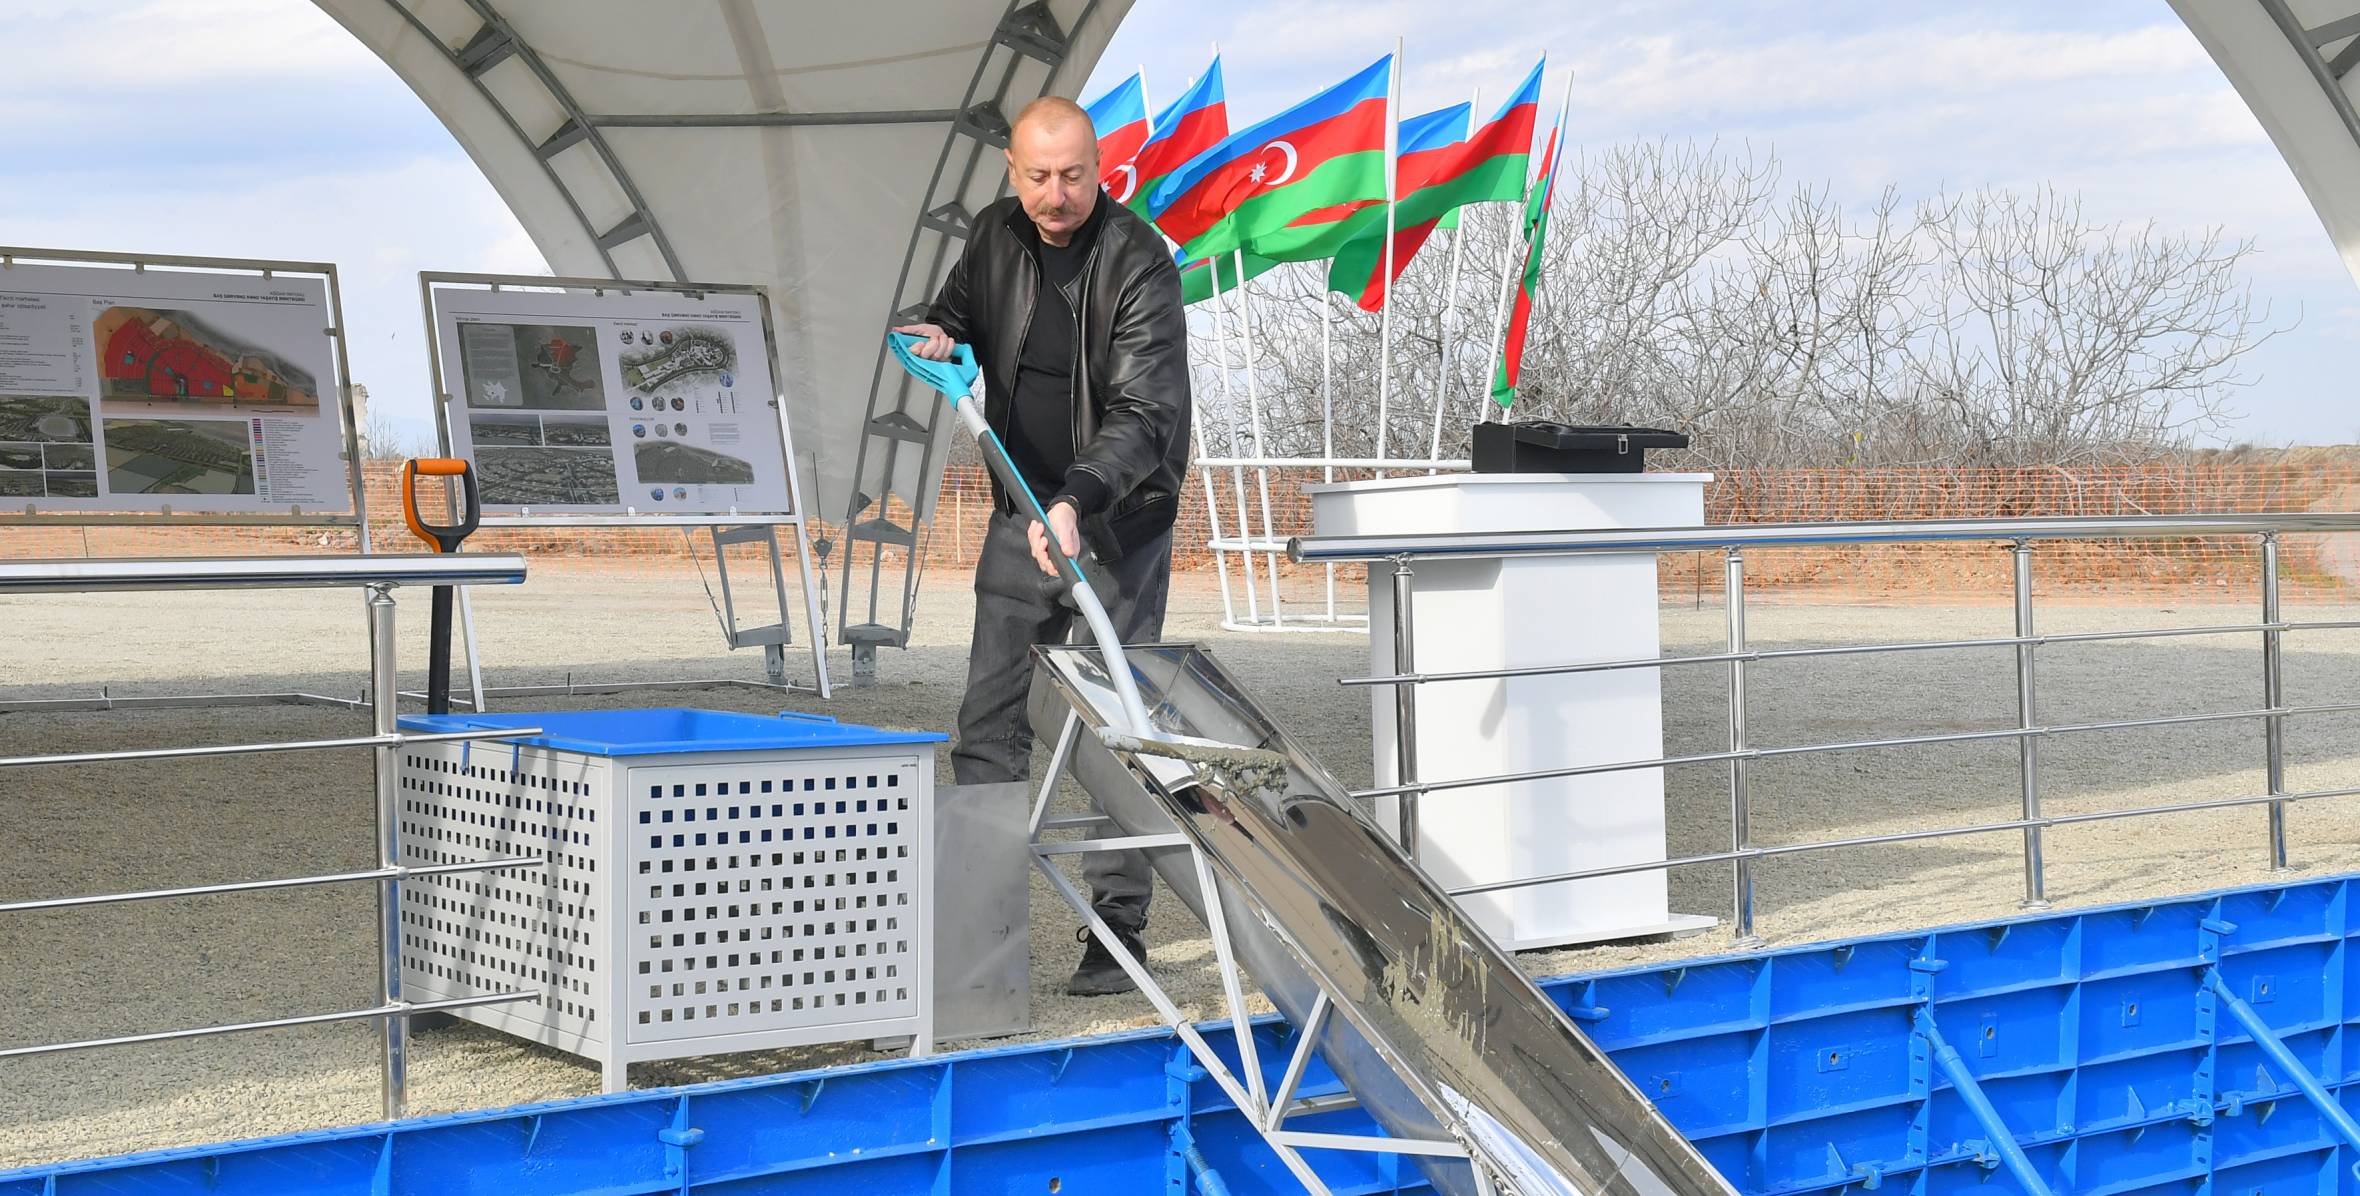 Ilham Aliyev has participated in a ceremony of the laying of the foundation stone for the village of Bash Garvand in the Aghdam district